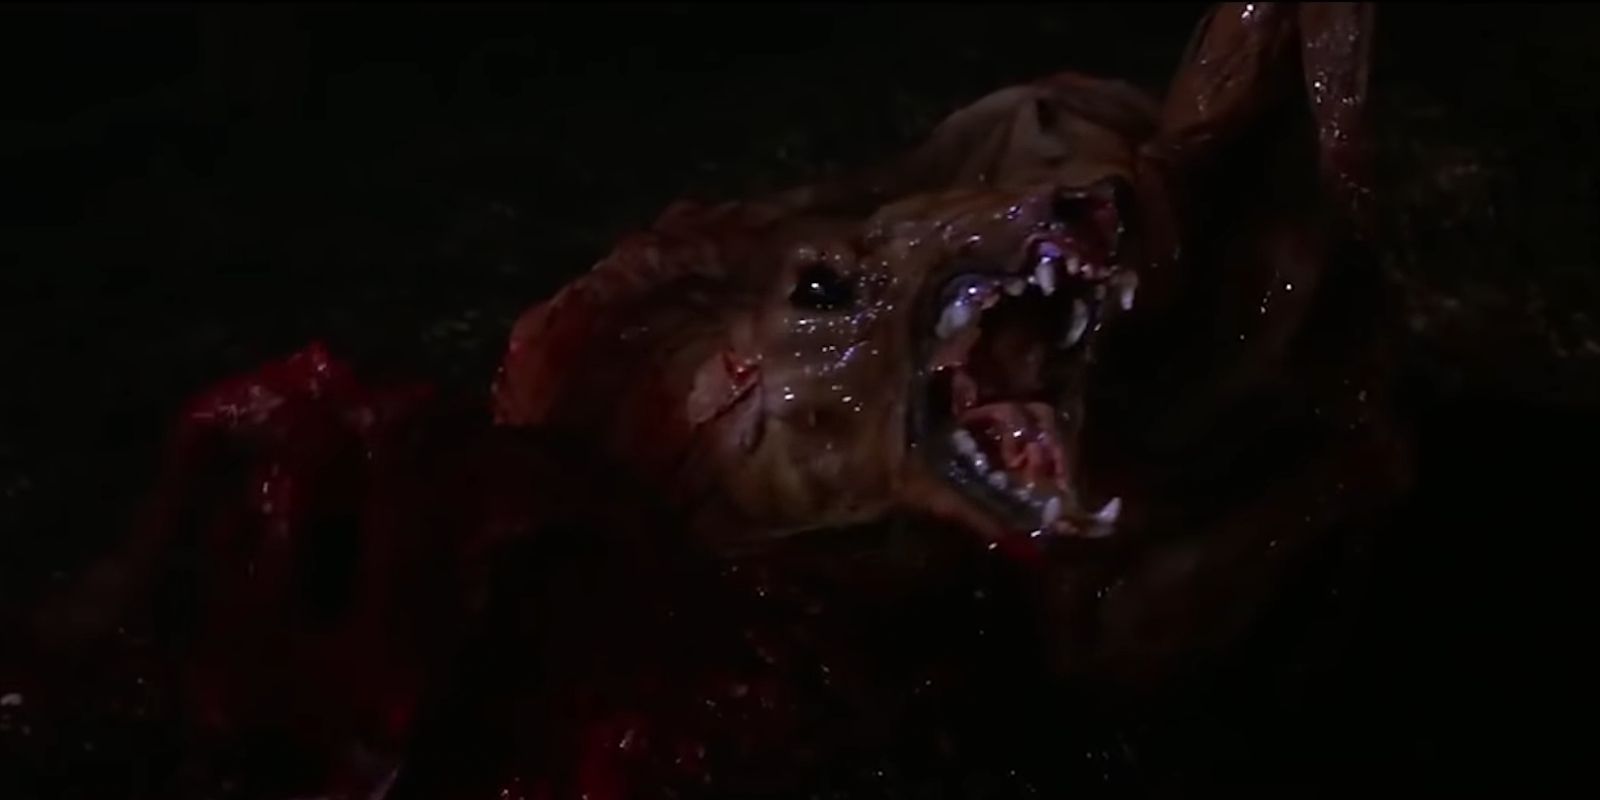 The Thing mutating into a dog monster in John Carpenter's The Thing